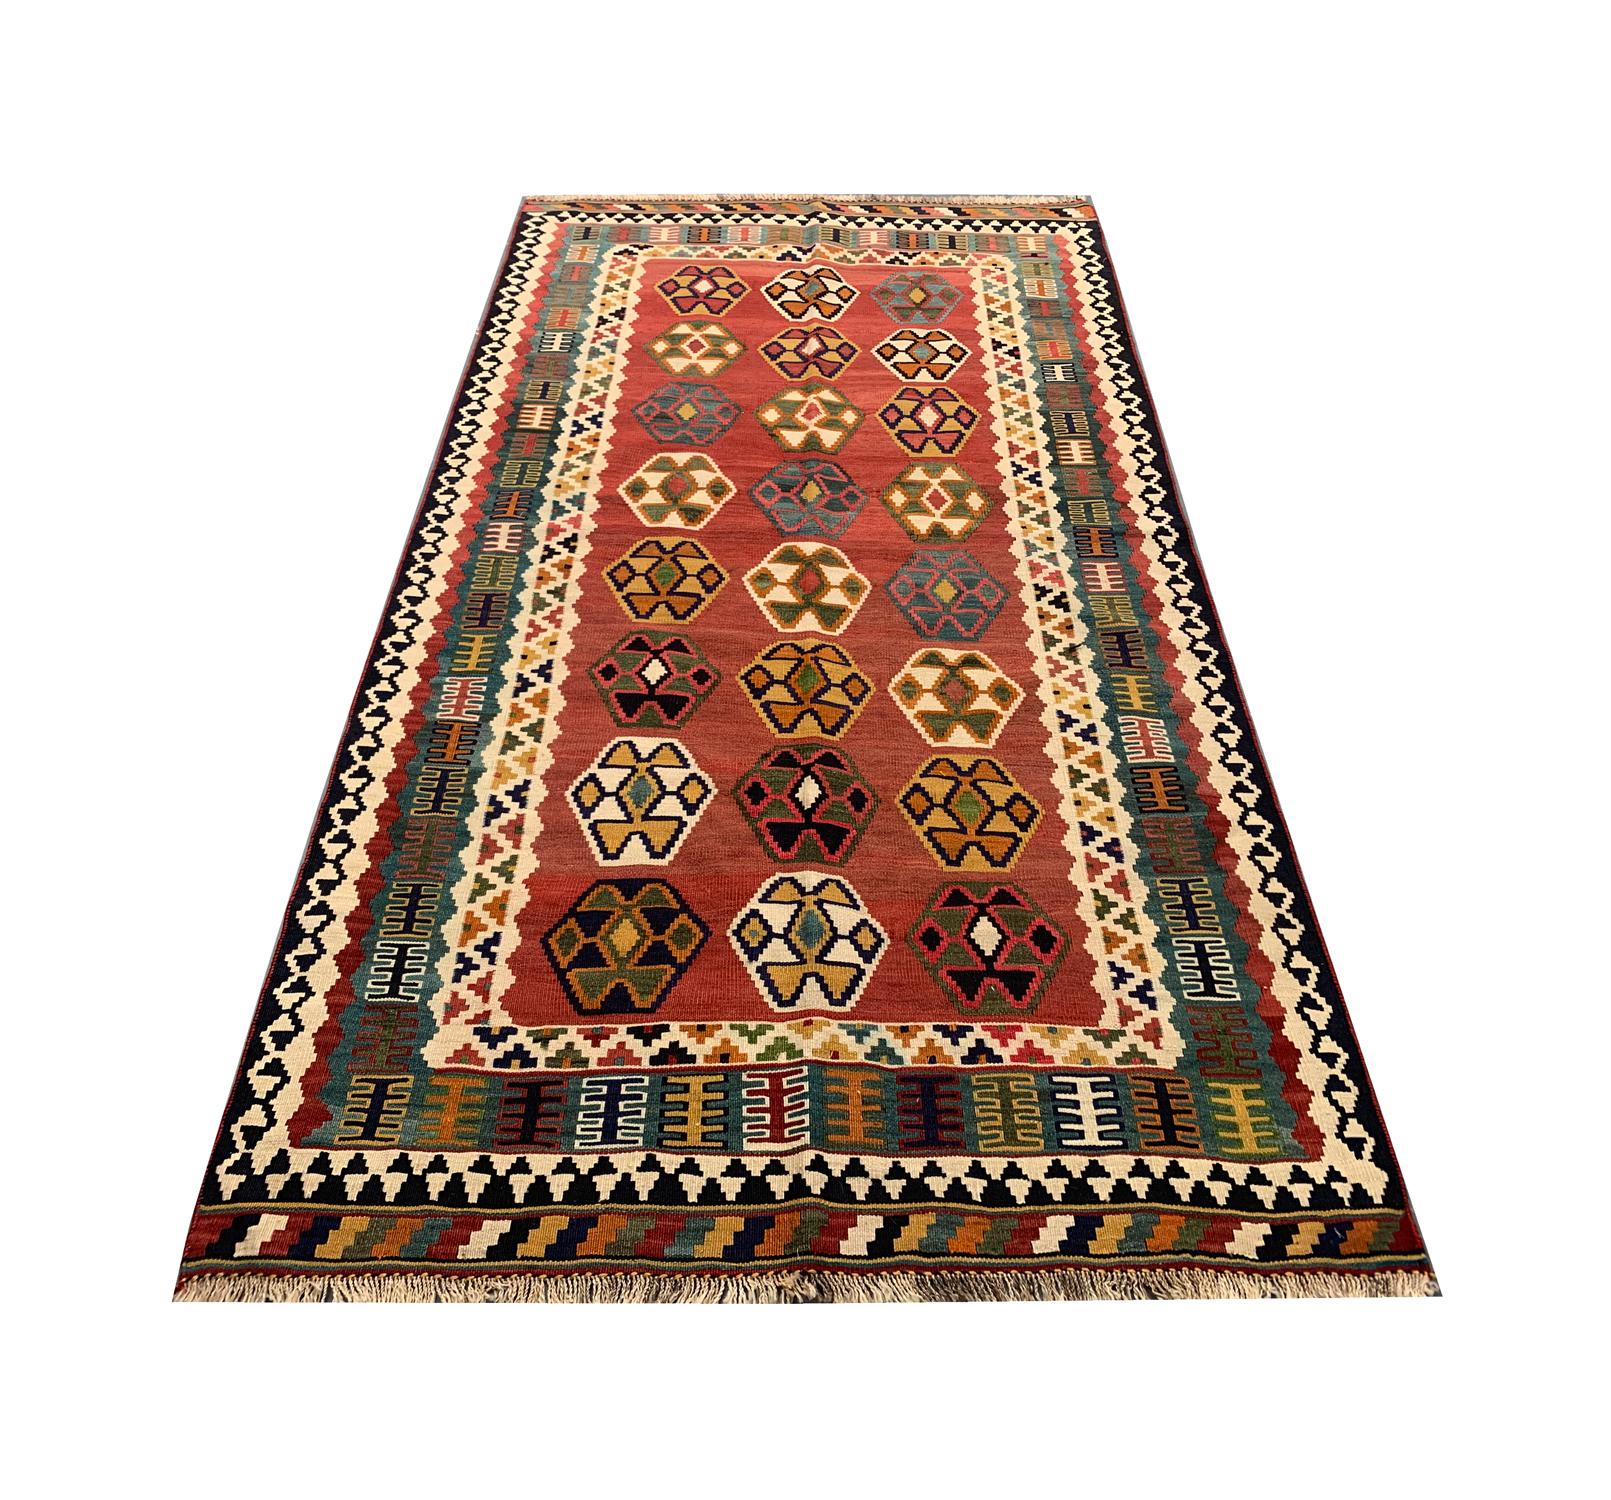 This fine, handwoven Caucasian Kilim was constructed in Azerbaijan and featured a fantastic tribal motif design. The central design has been woven on a red field and features, cream, green and black accent colours that make up the motif pattern. The